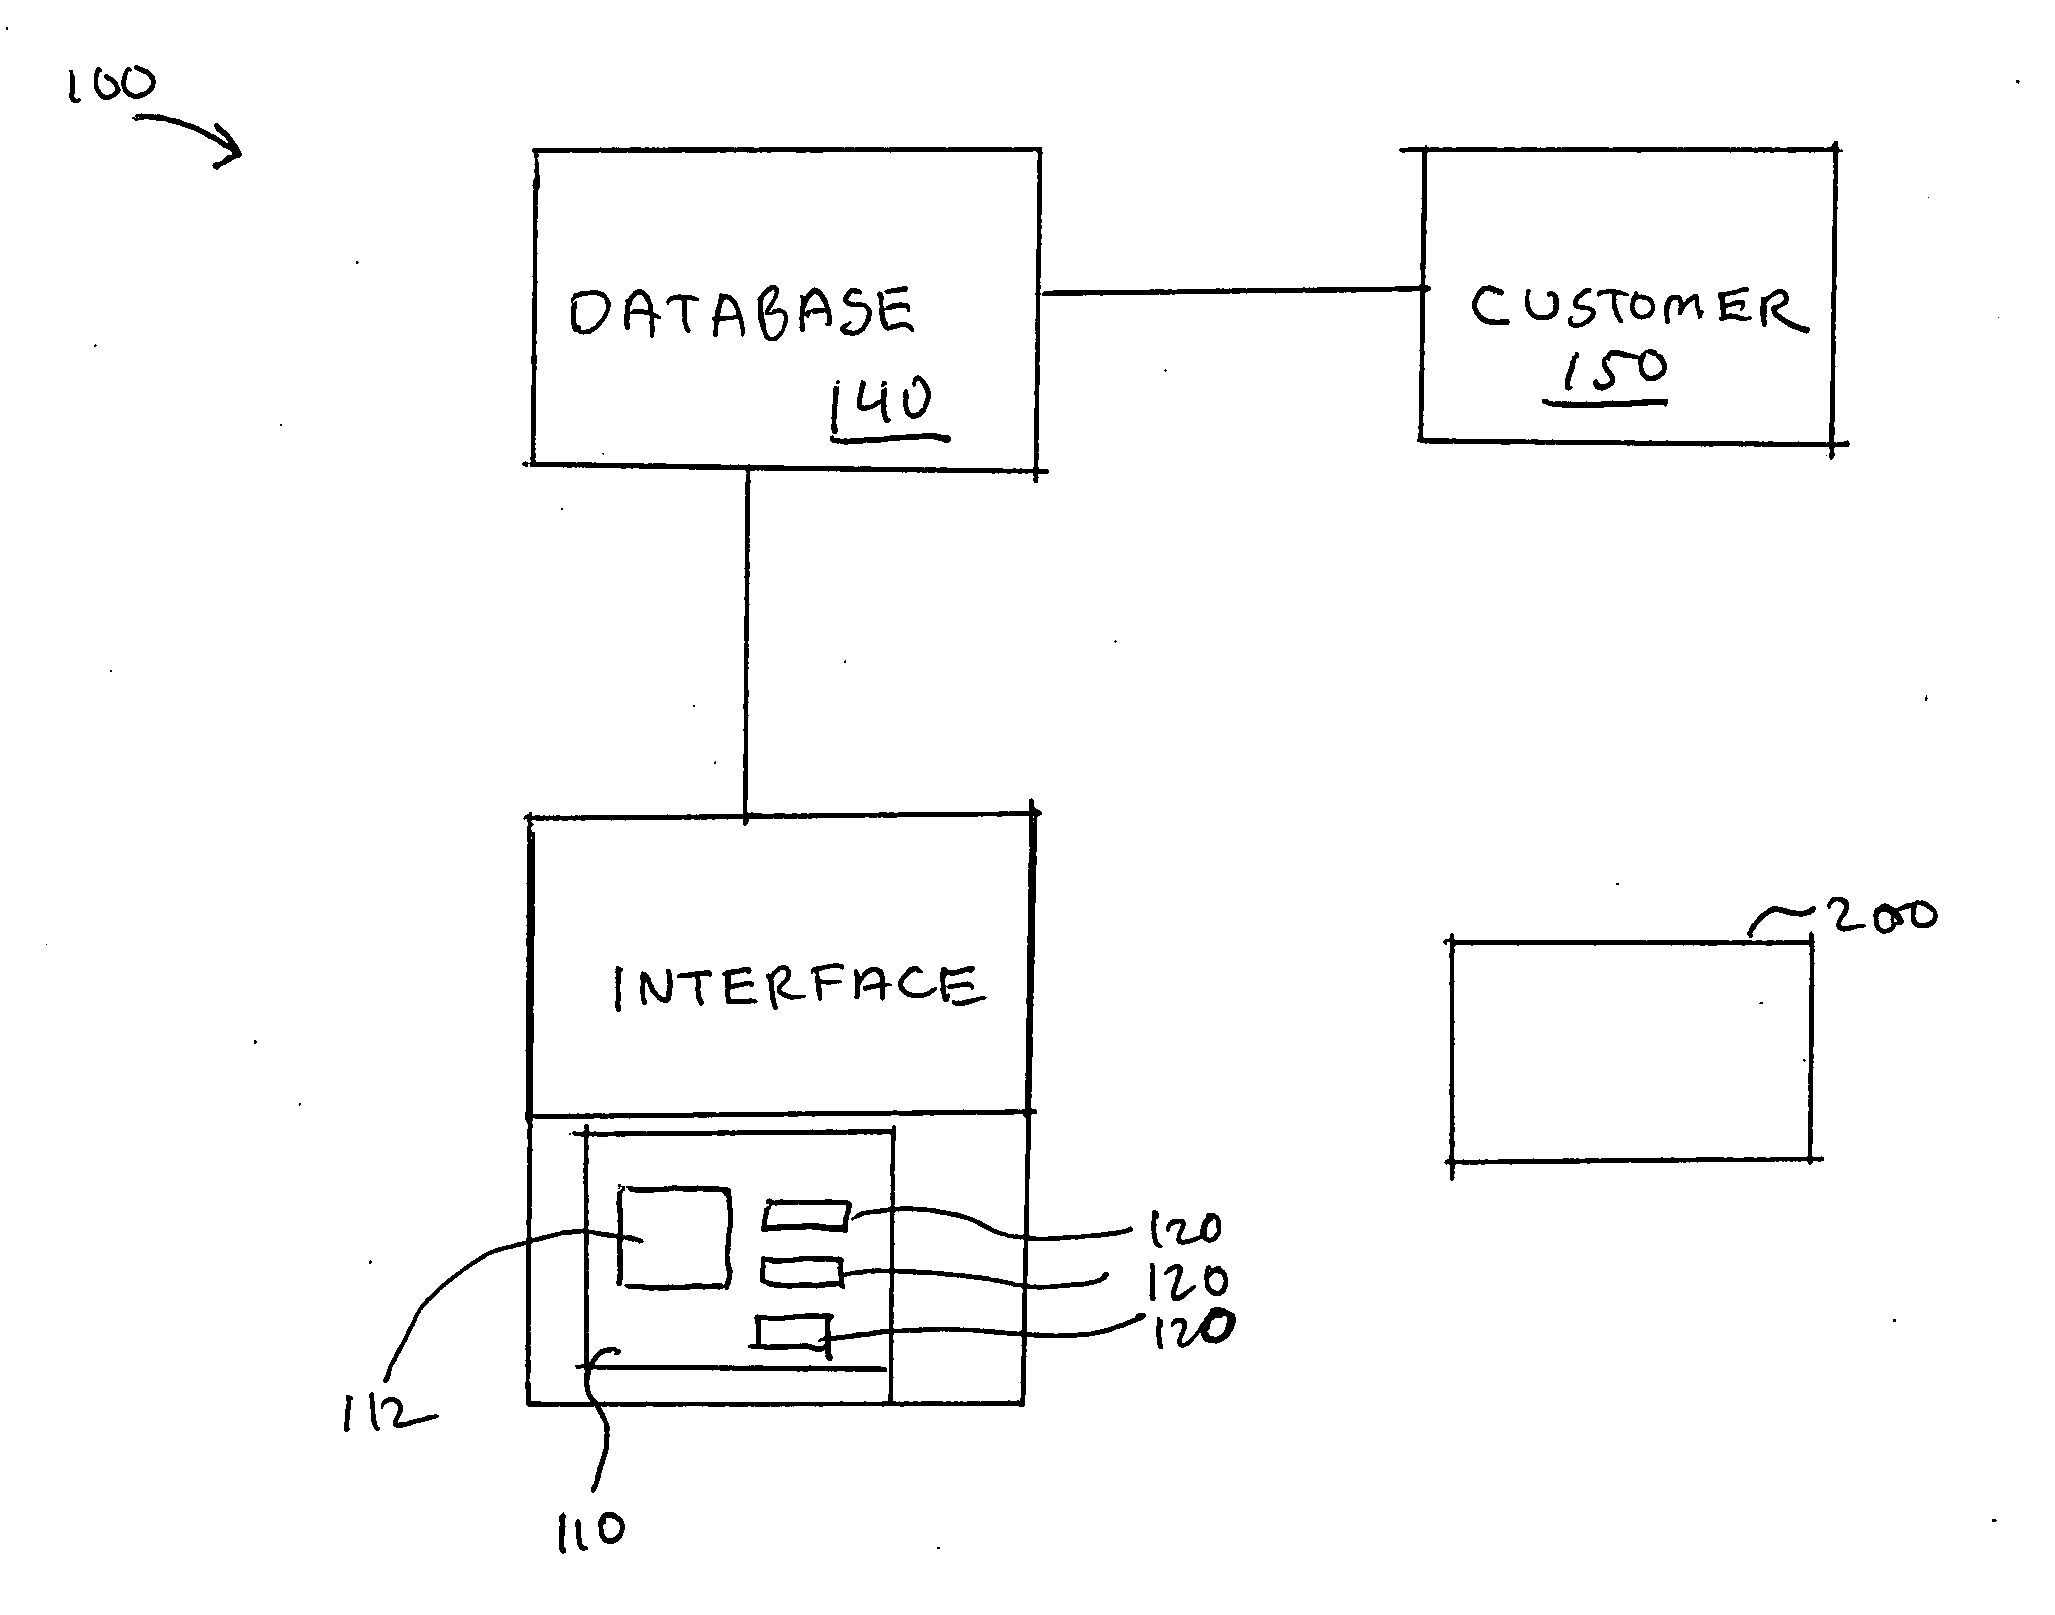 System and method of cost distribution and invoice management for products having time-based benefits